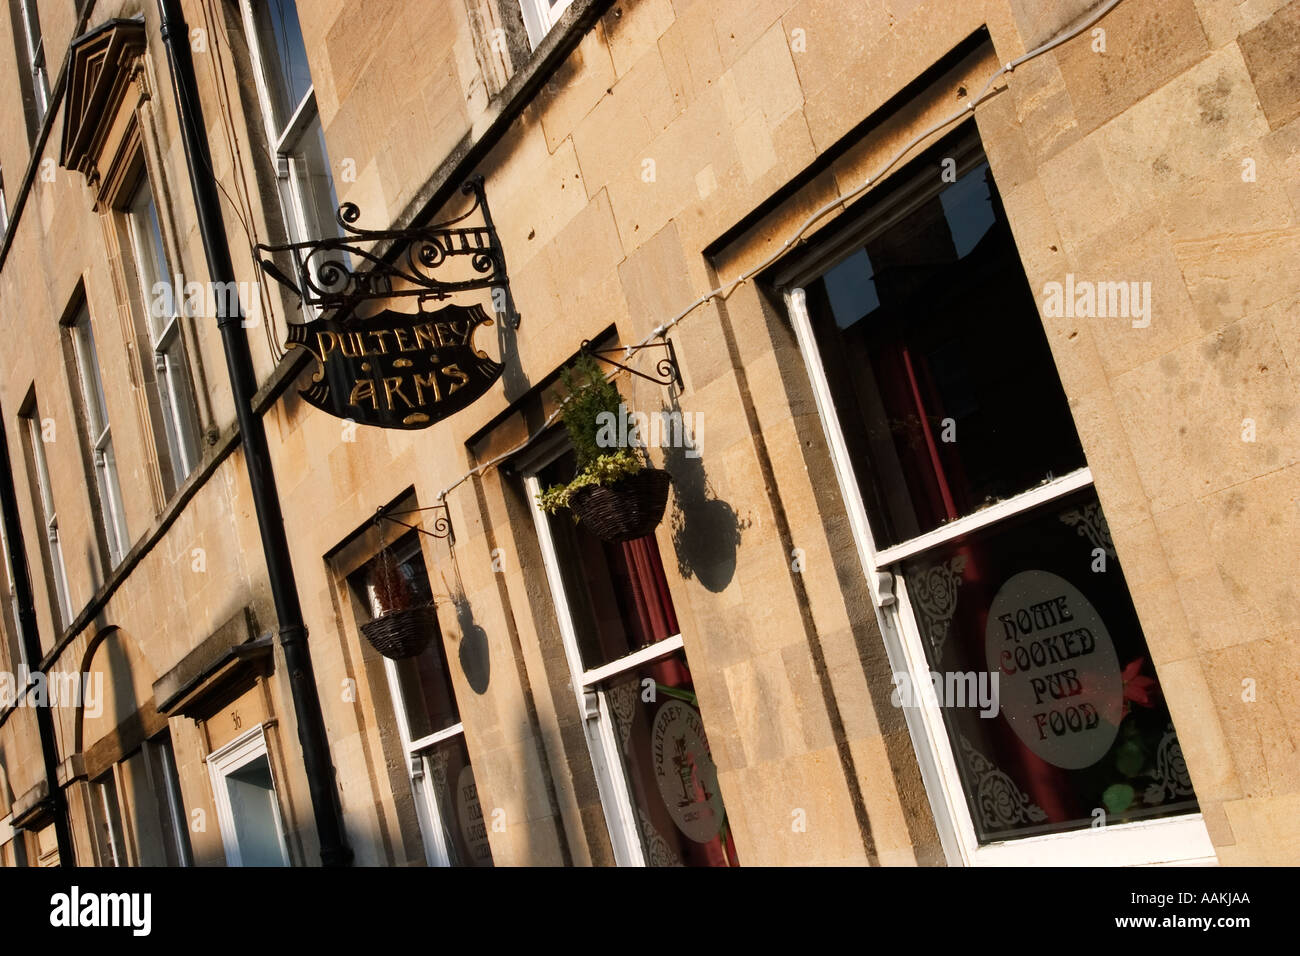 The Pulteney Arms Pub in Bath Somerset England Stock Photo